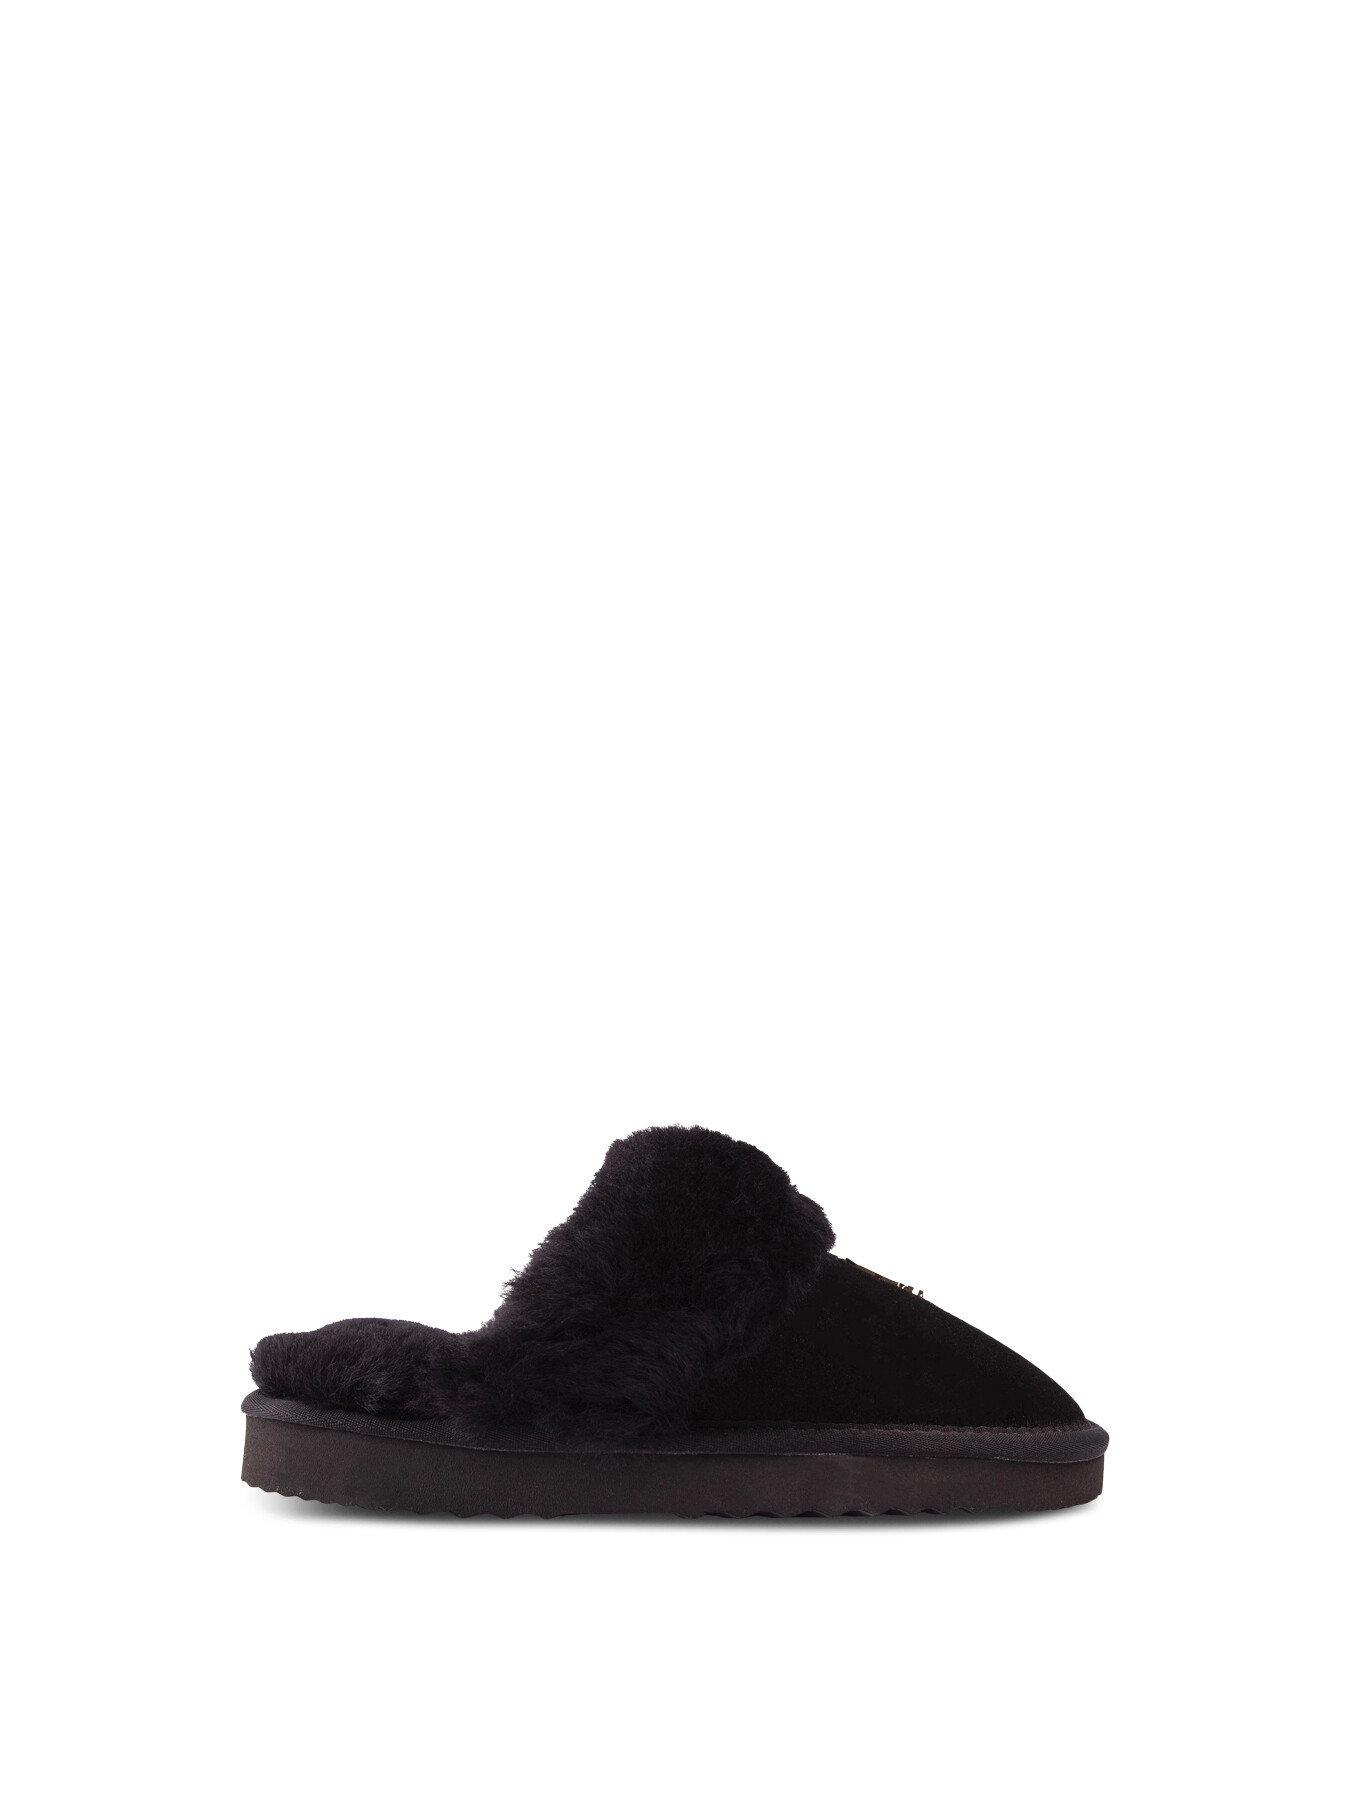 Holland Cooper Women's  Shearling Slippers